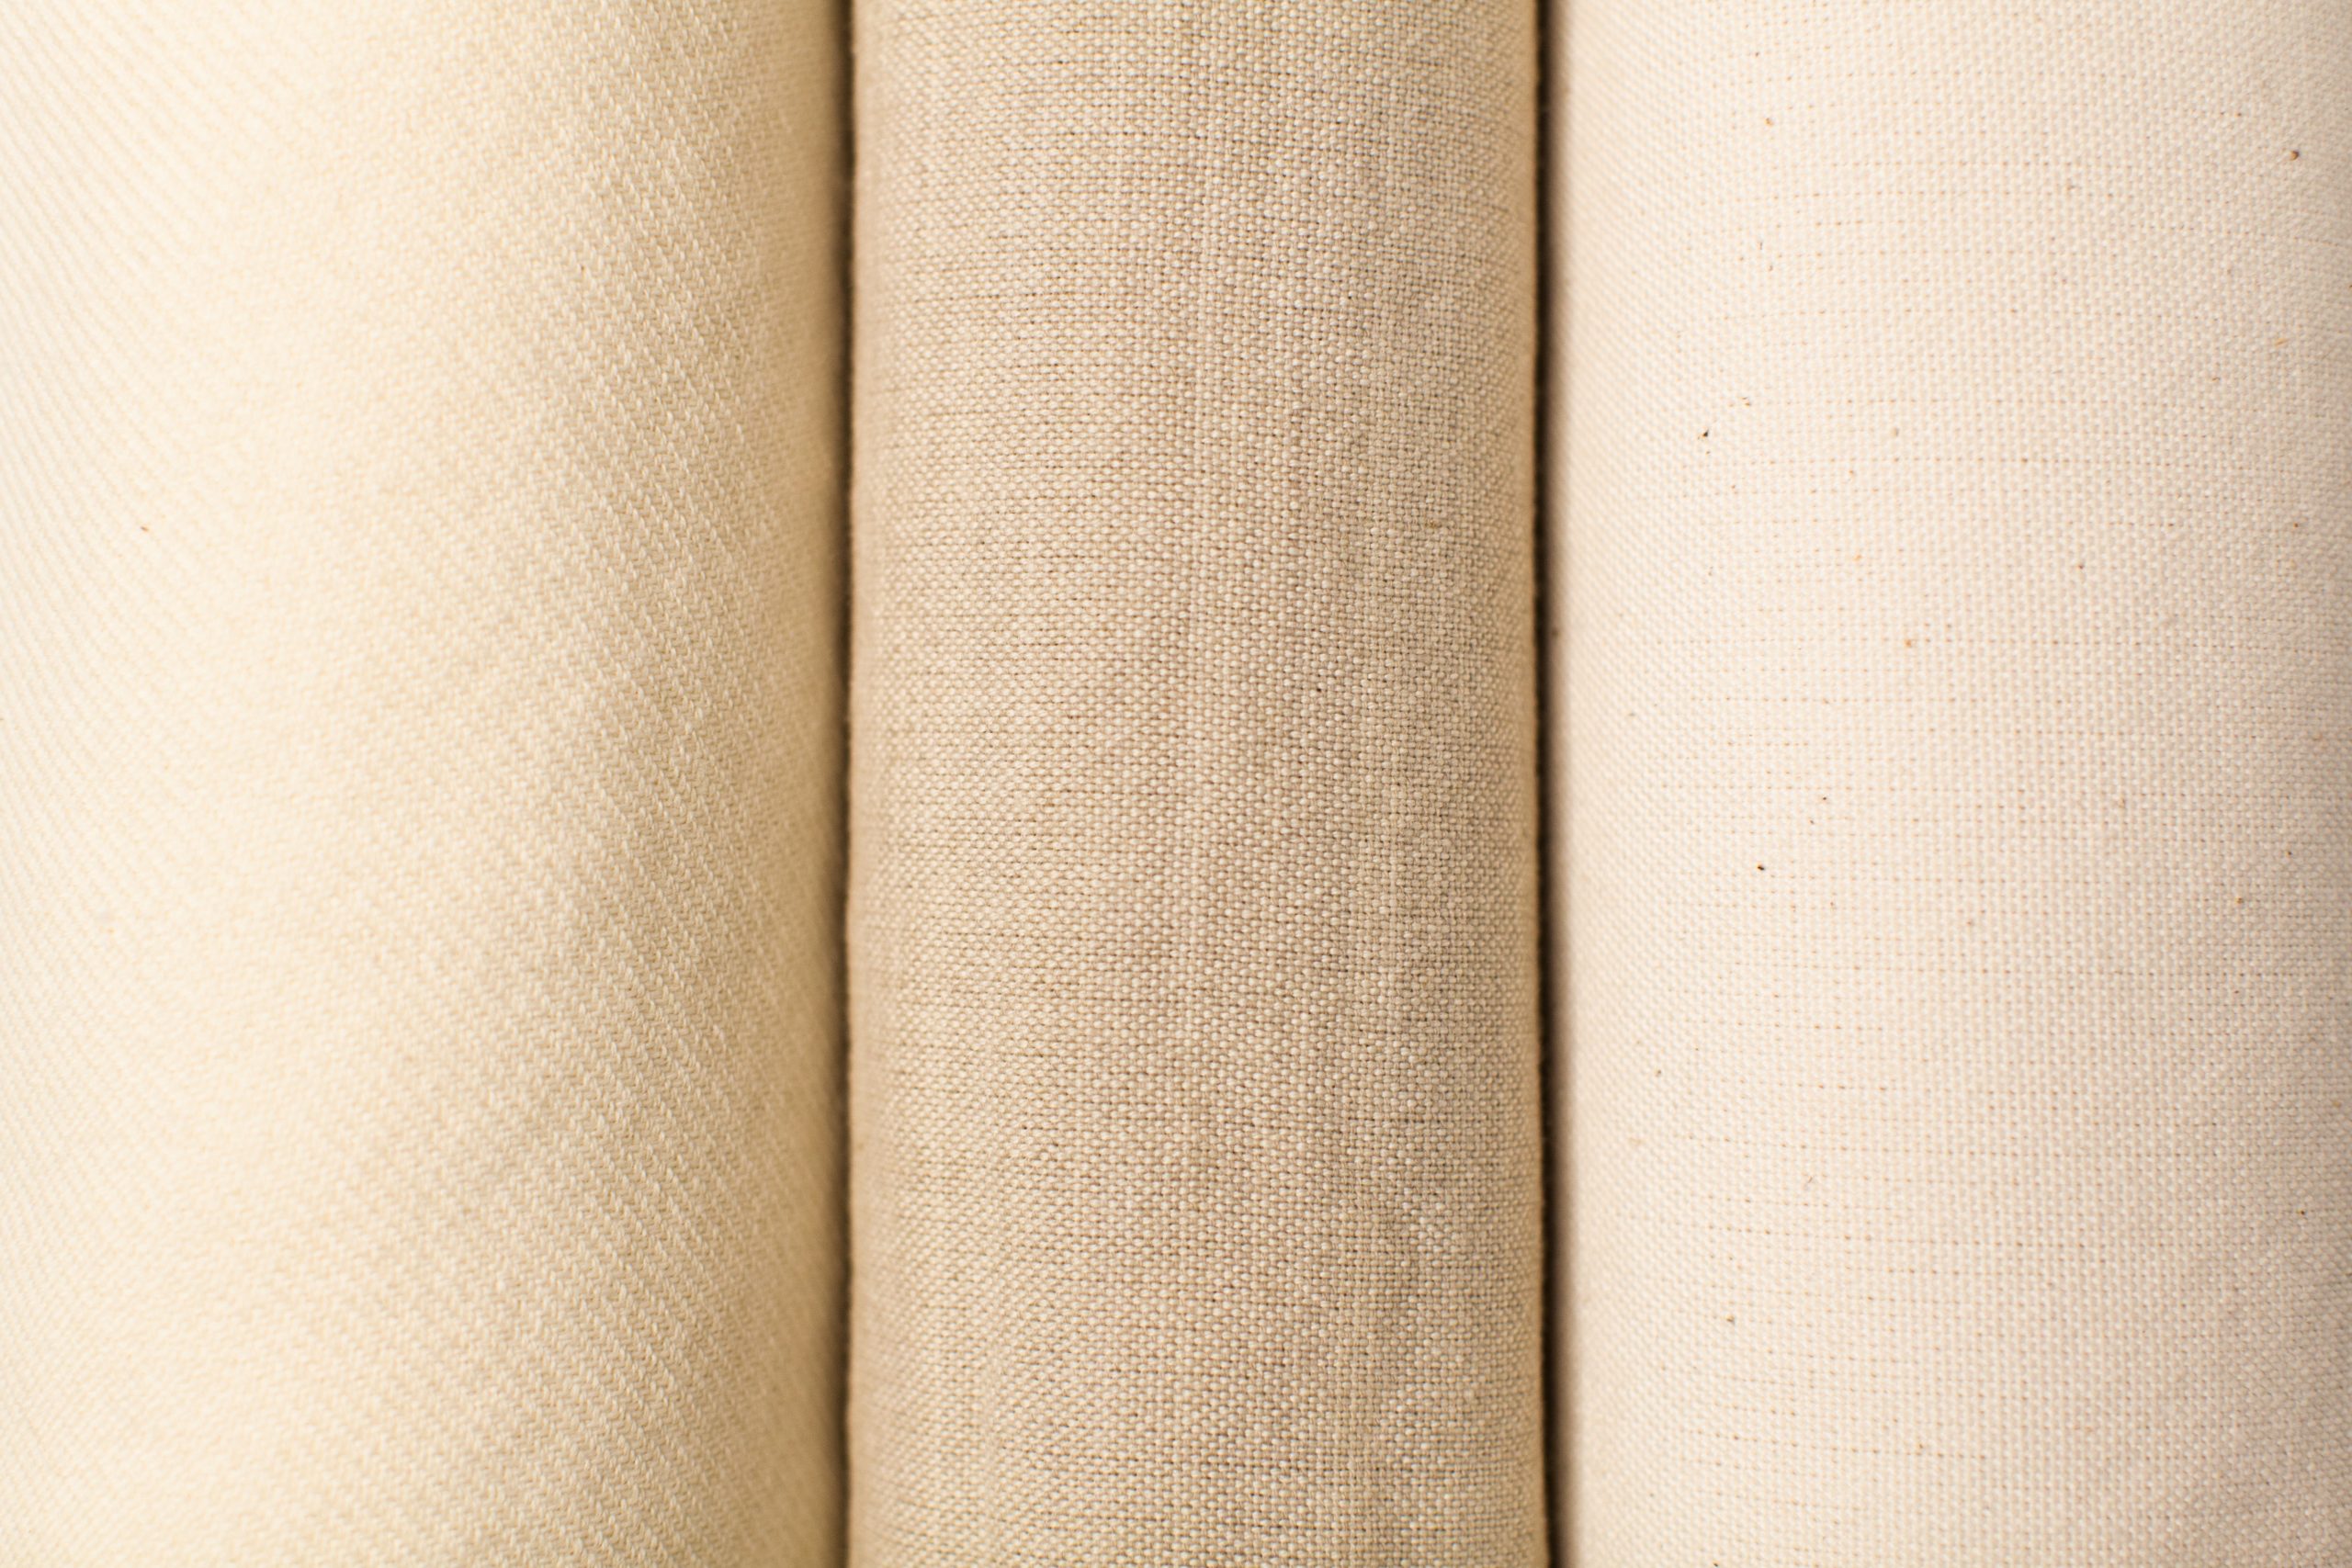 color photograph of three different heritage textiles from a creamy off white wool twill to tan and white cotton plain weaves